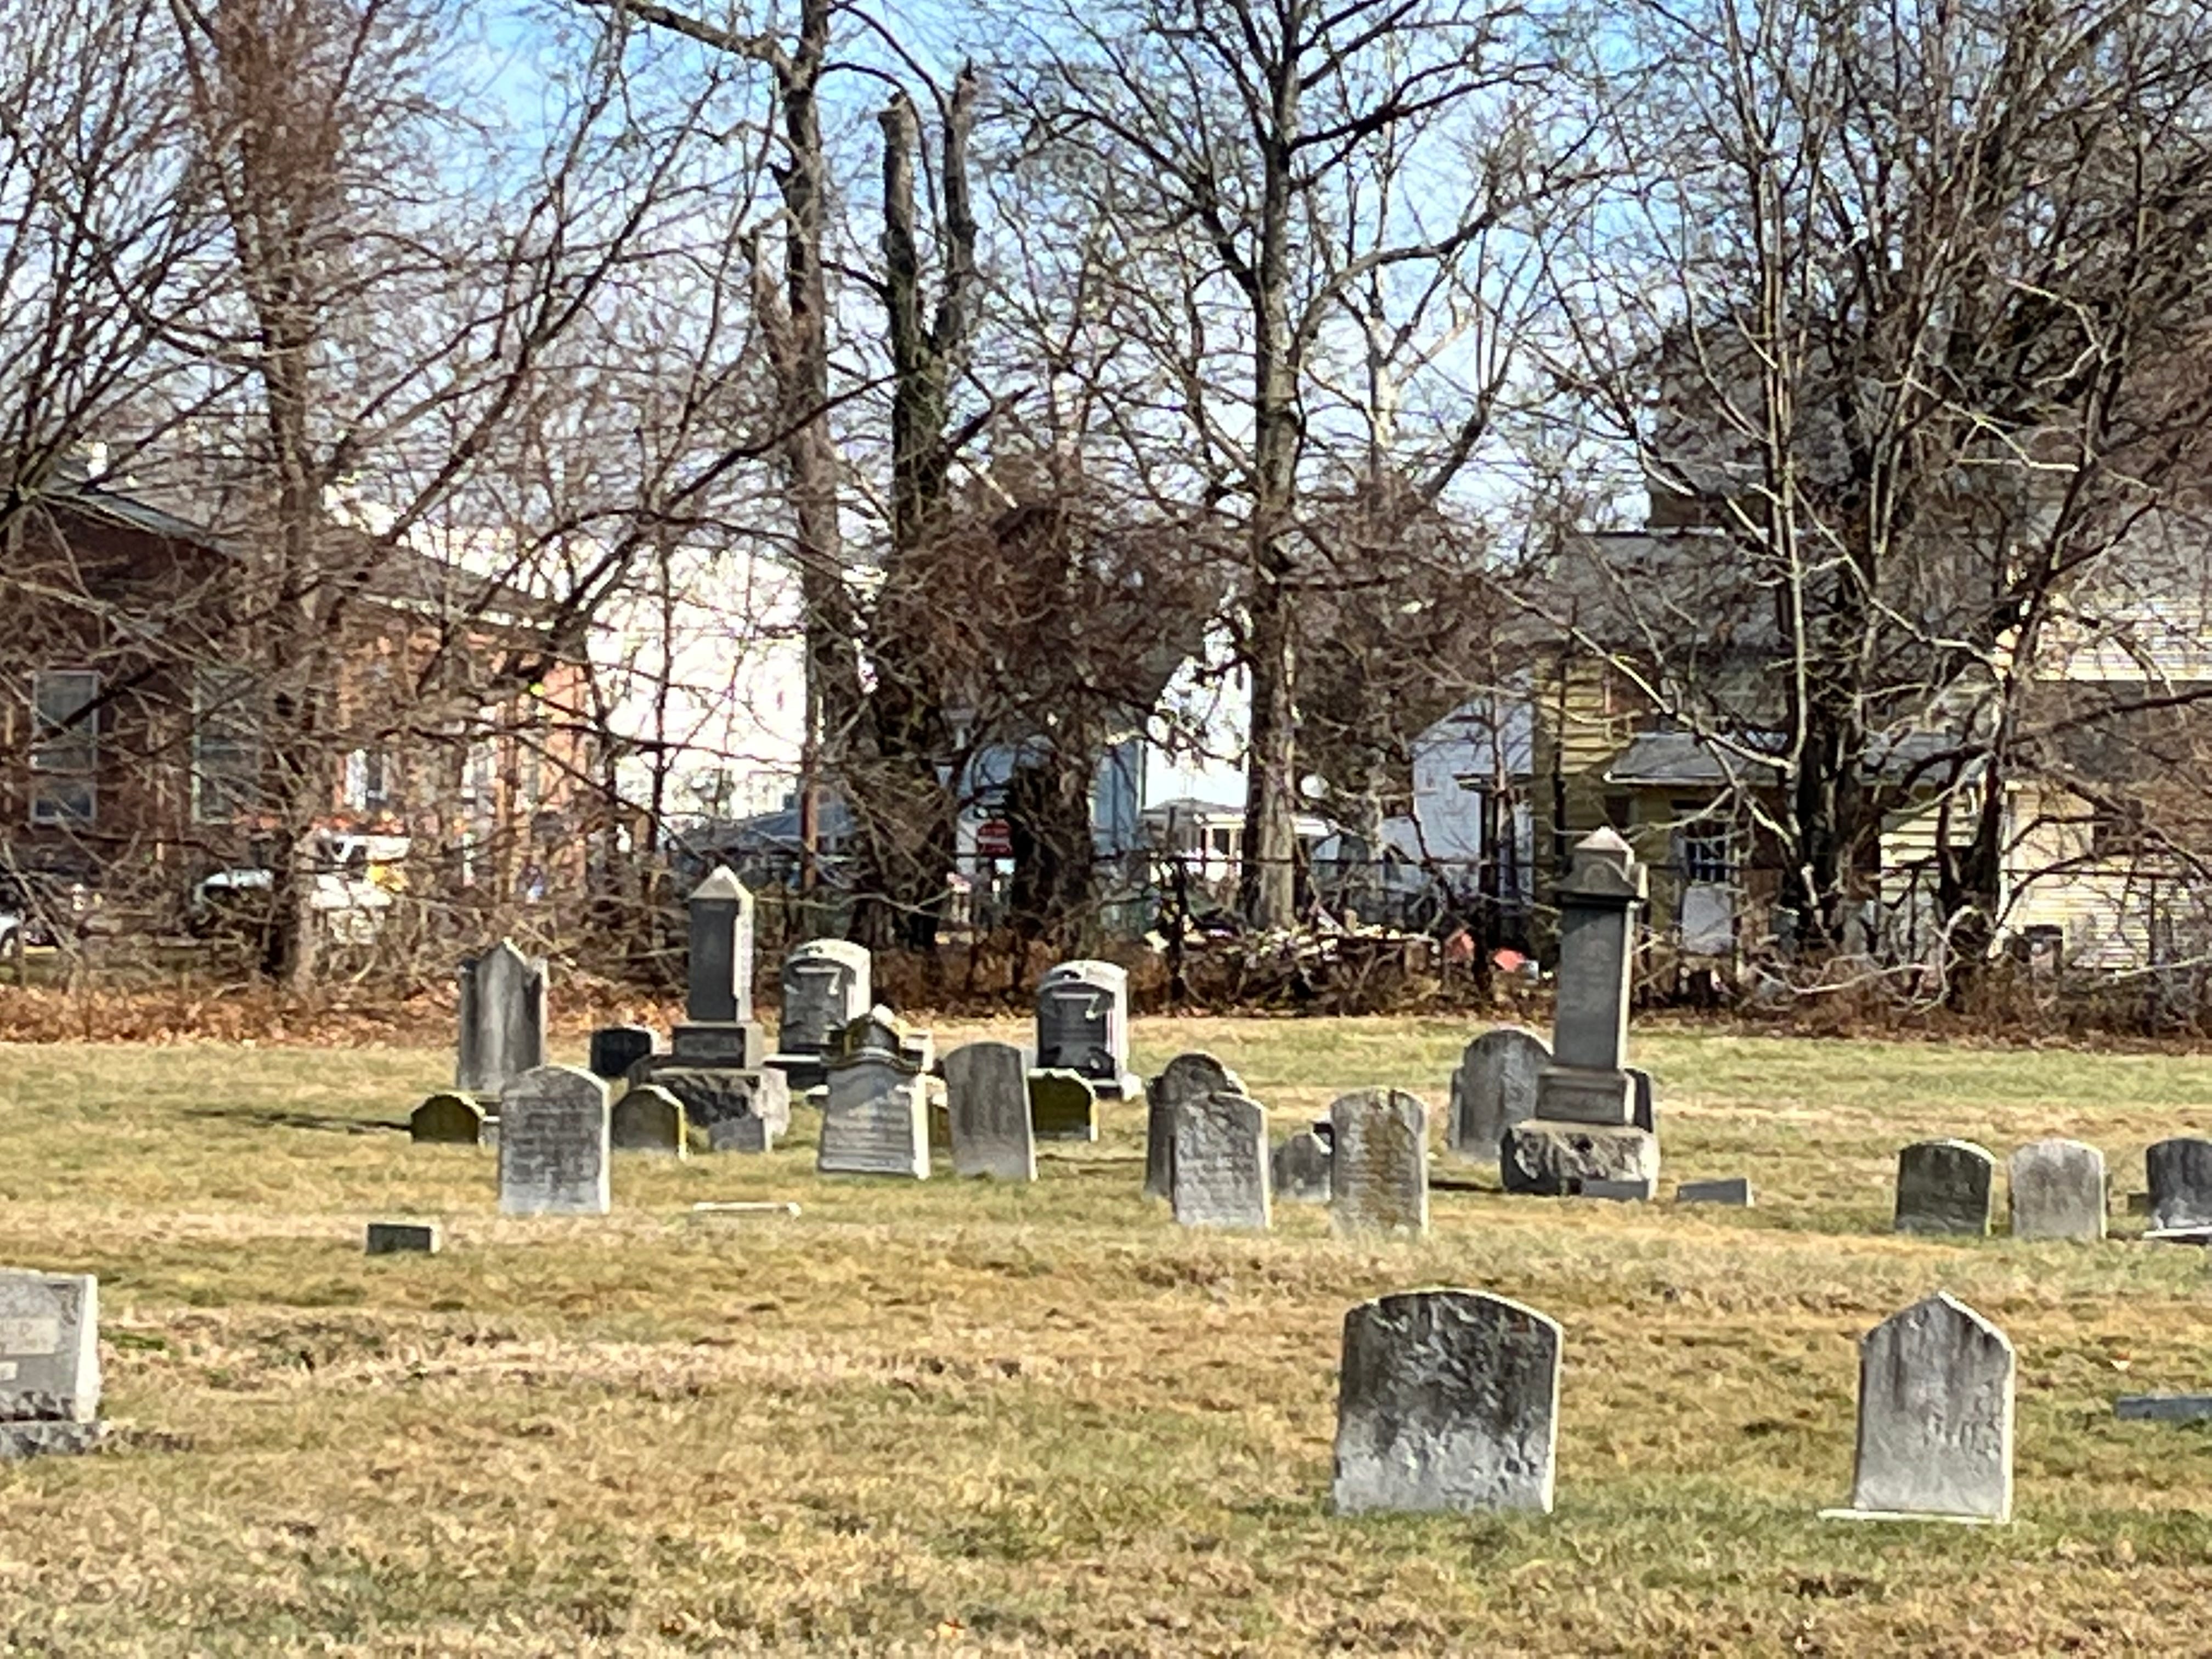 The Broad Street Methodist Cemetery in Burlington, New Jersey, where African American Revolutionary War soldier Oliver Cromwell is believed to be buried. His grave is unmarked.